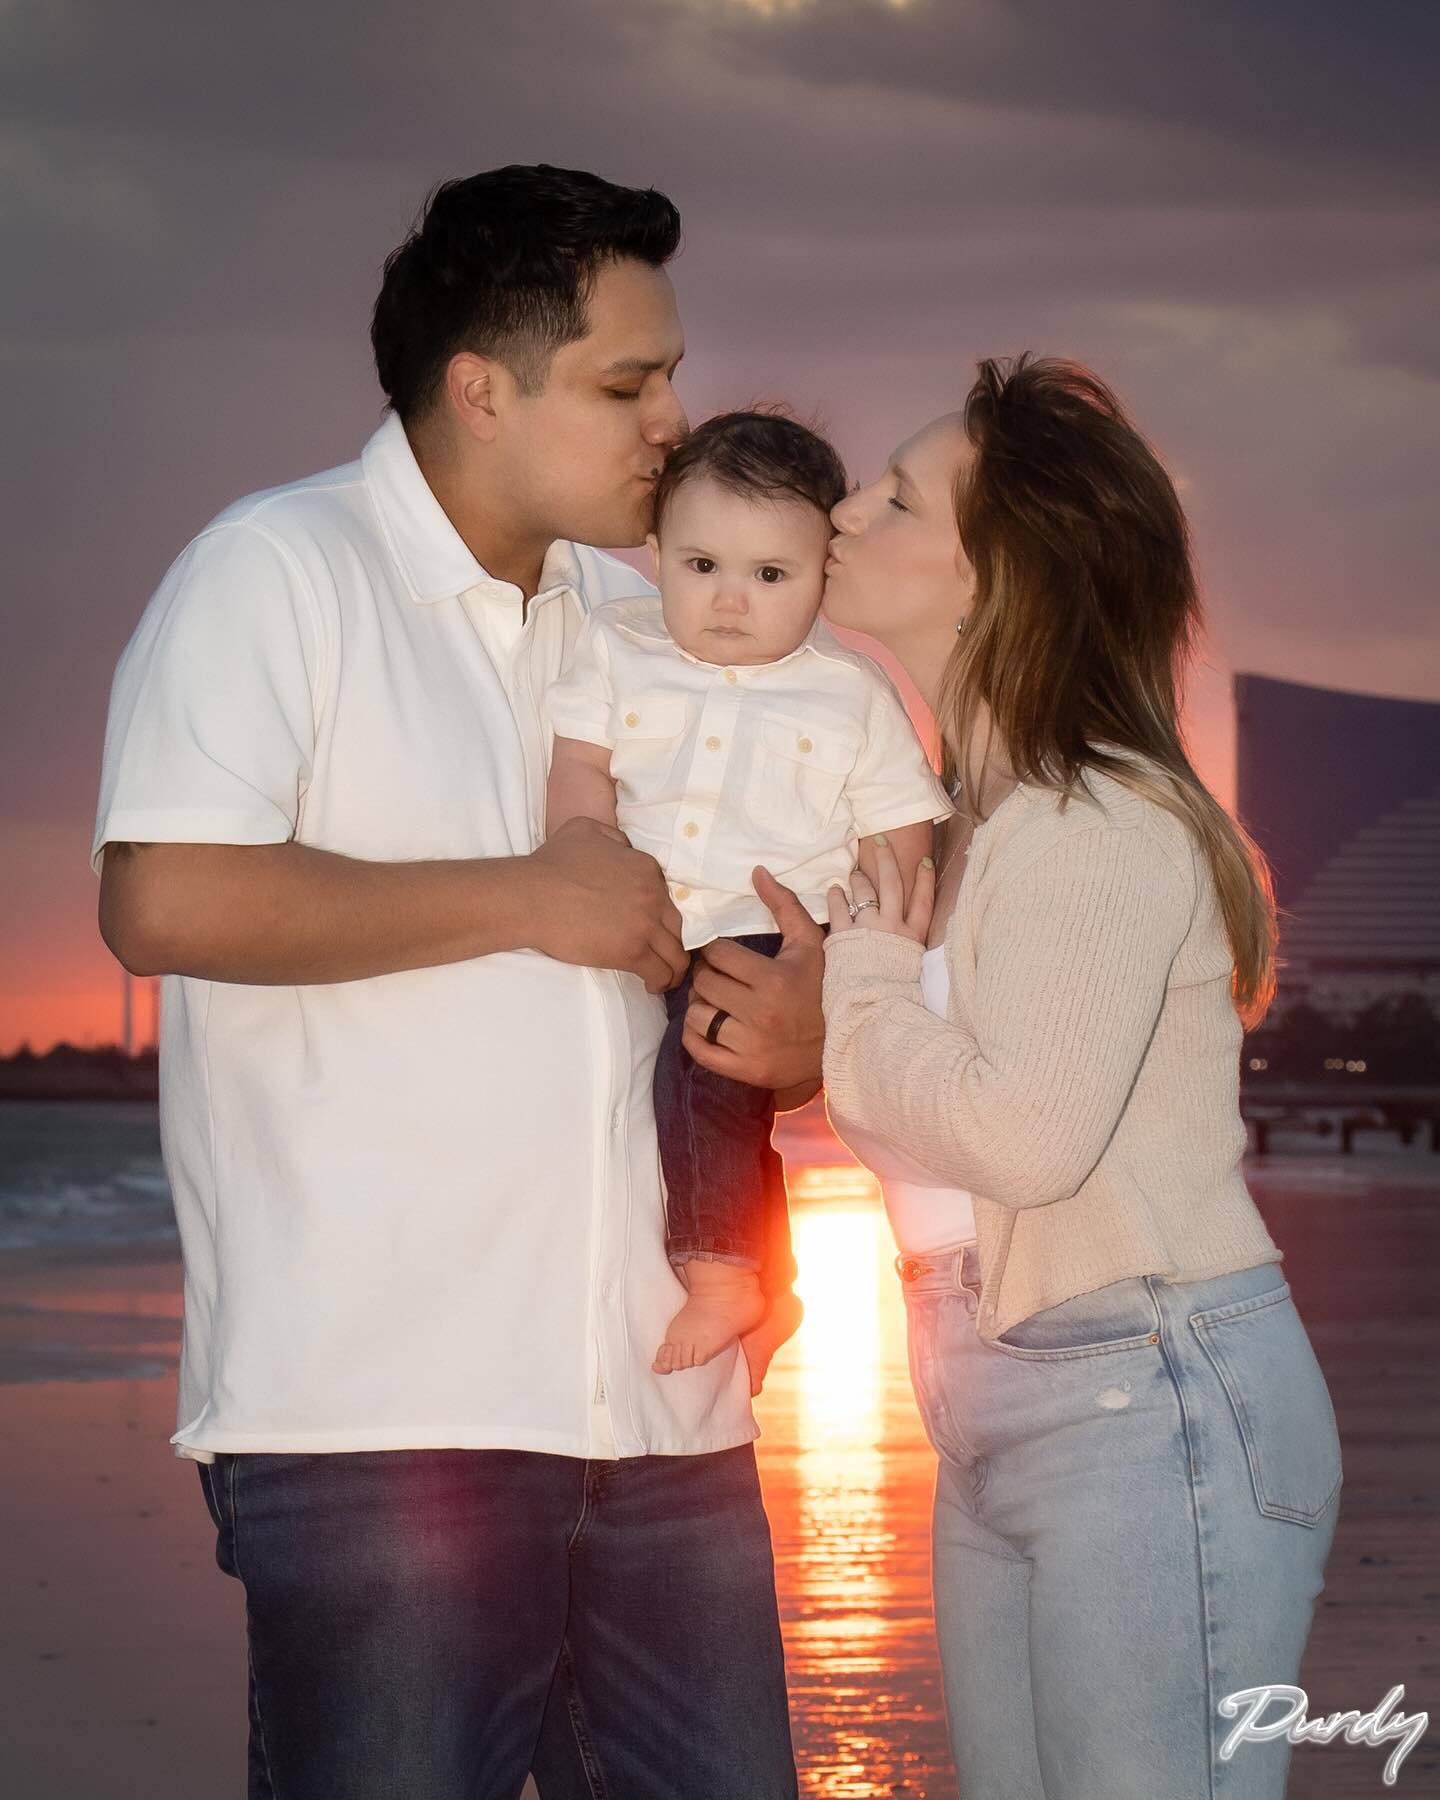 My second shoot with this little guy &amp; his family.  #year1 #familyphotography #sunset #familyportraits #brigantinebeach #maternityshoot